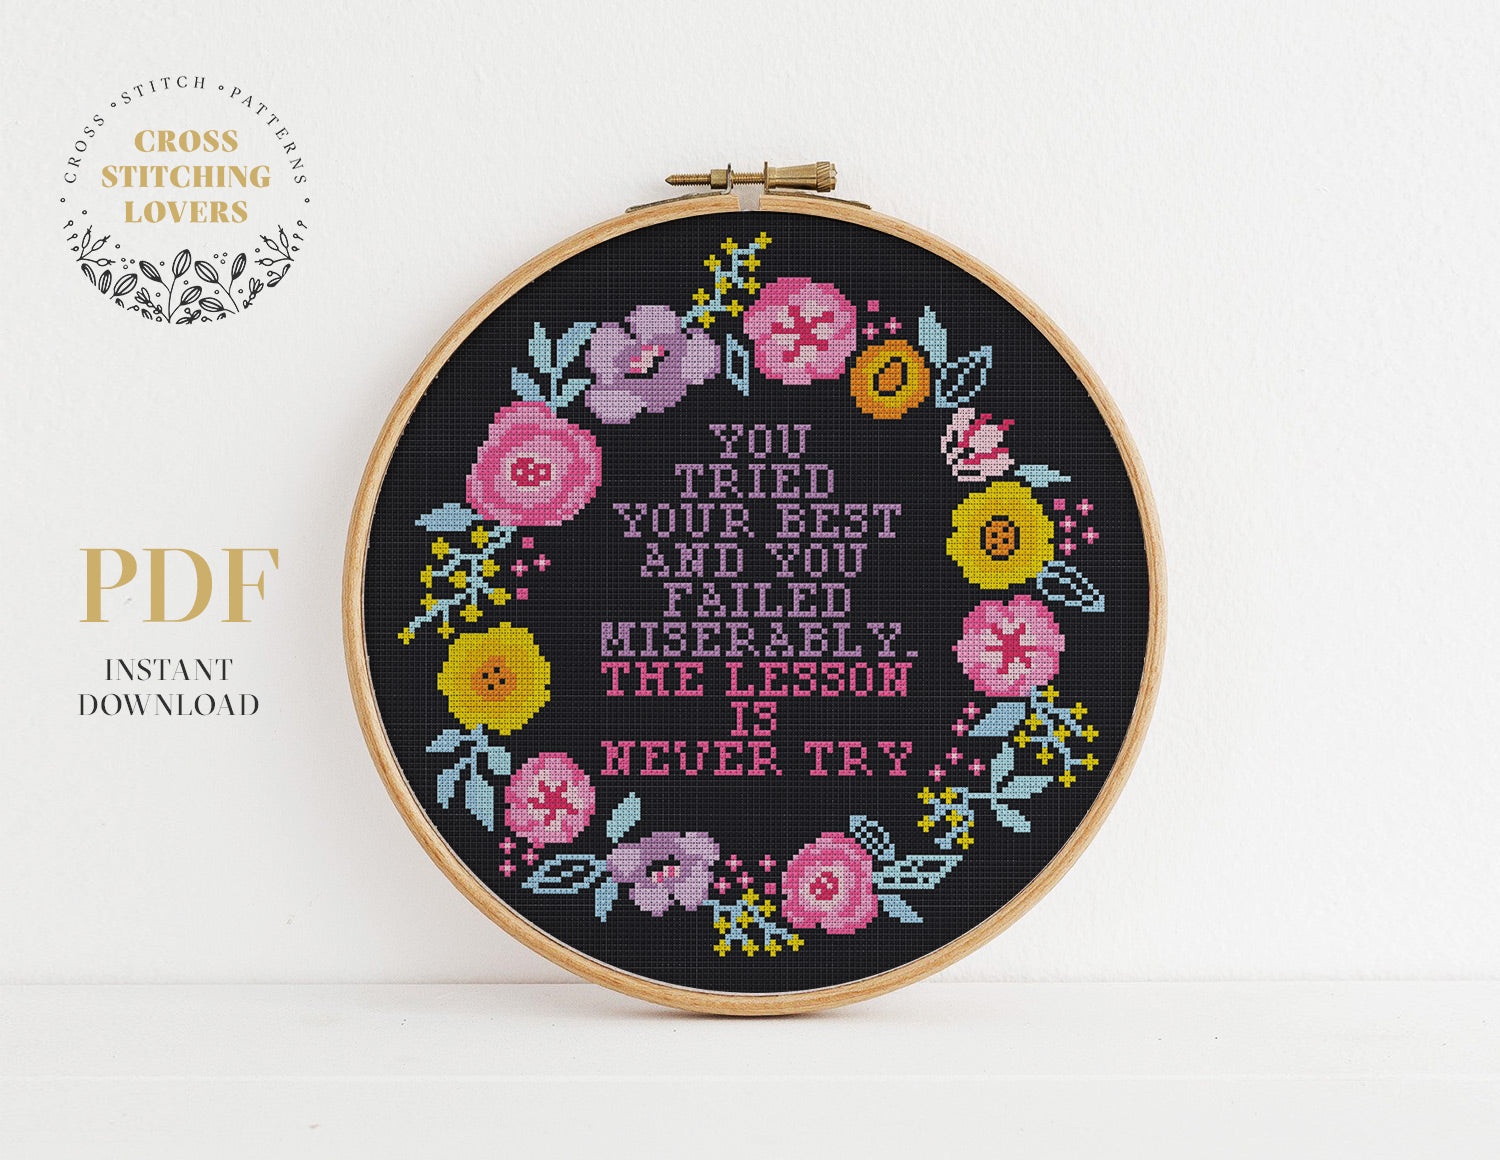 Snarky and funny - Cross stitch pattern – Cross Stitching Lovers